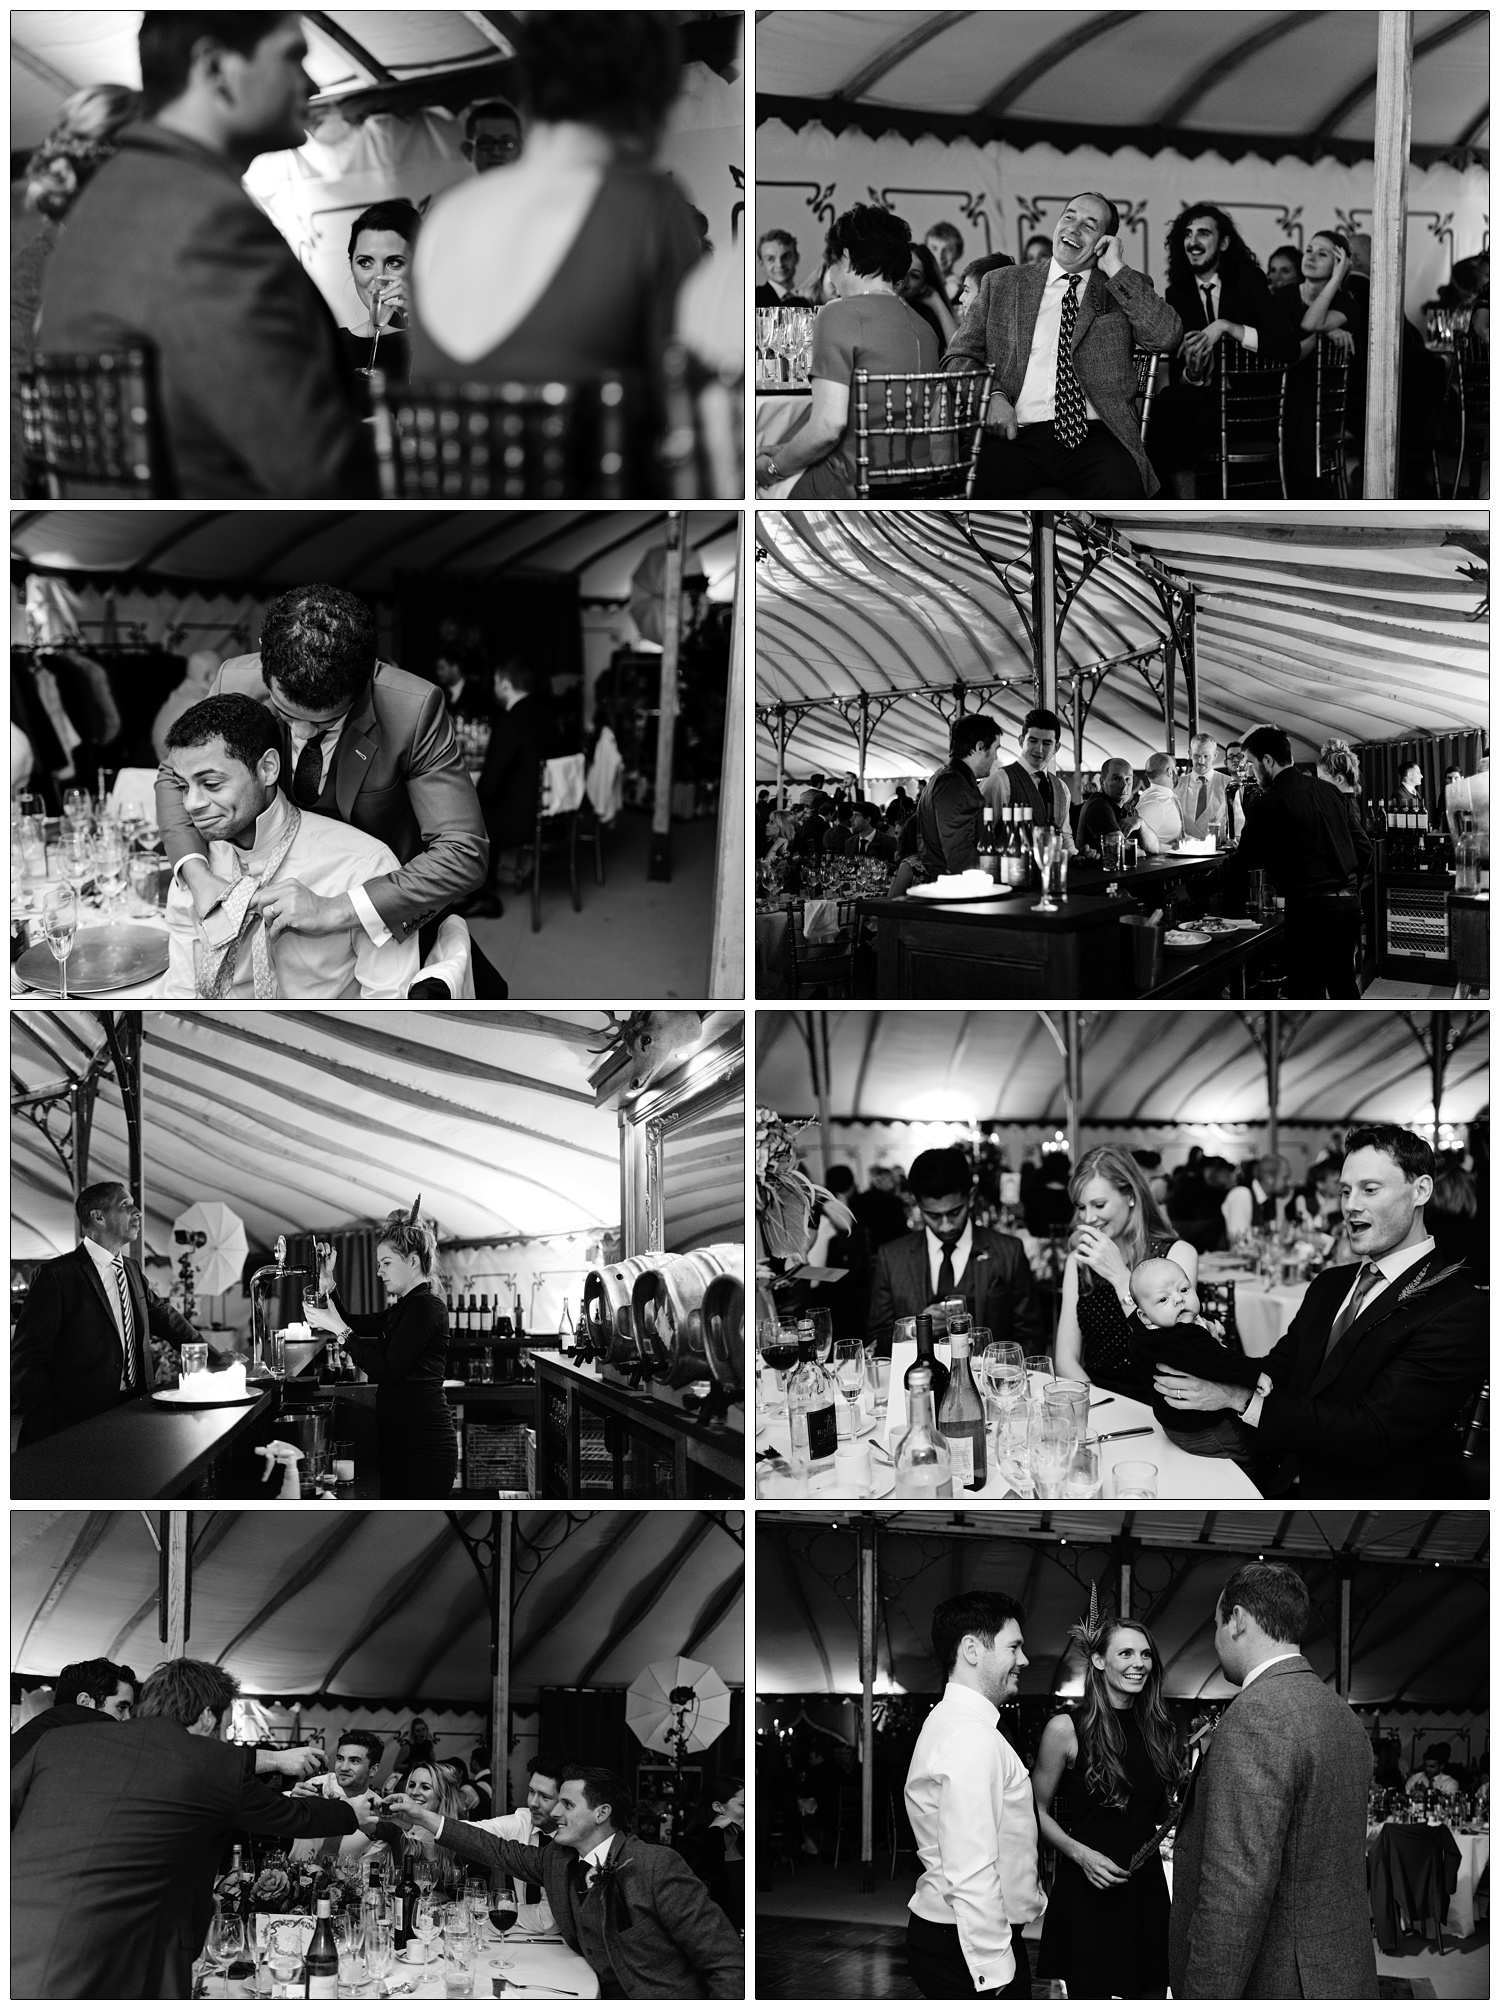 Reportage style photography from a wedding reception near Chelmsford. A man helps another man with his tie, a man holds a baby on the table, a group of people sat around a table do shots.